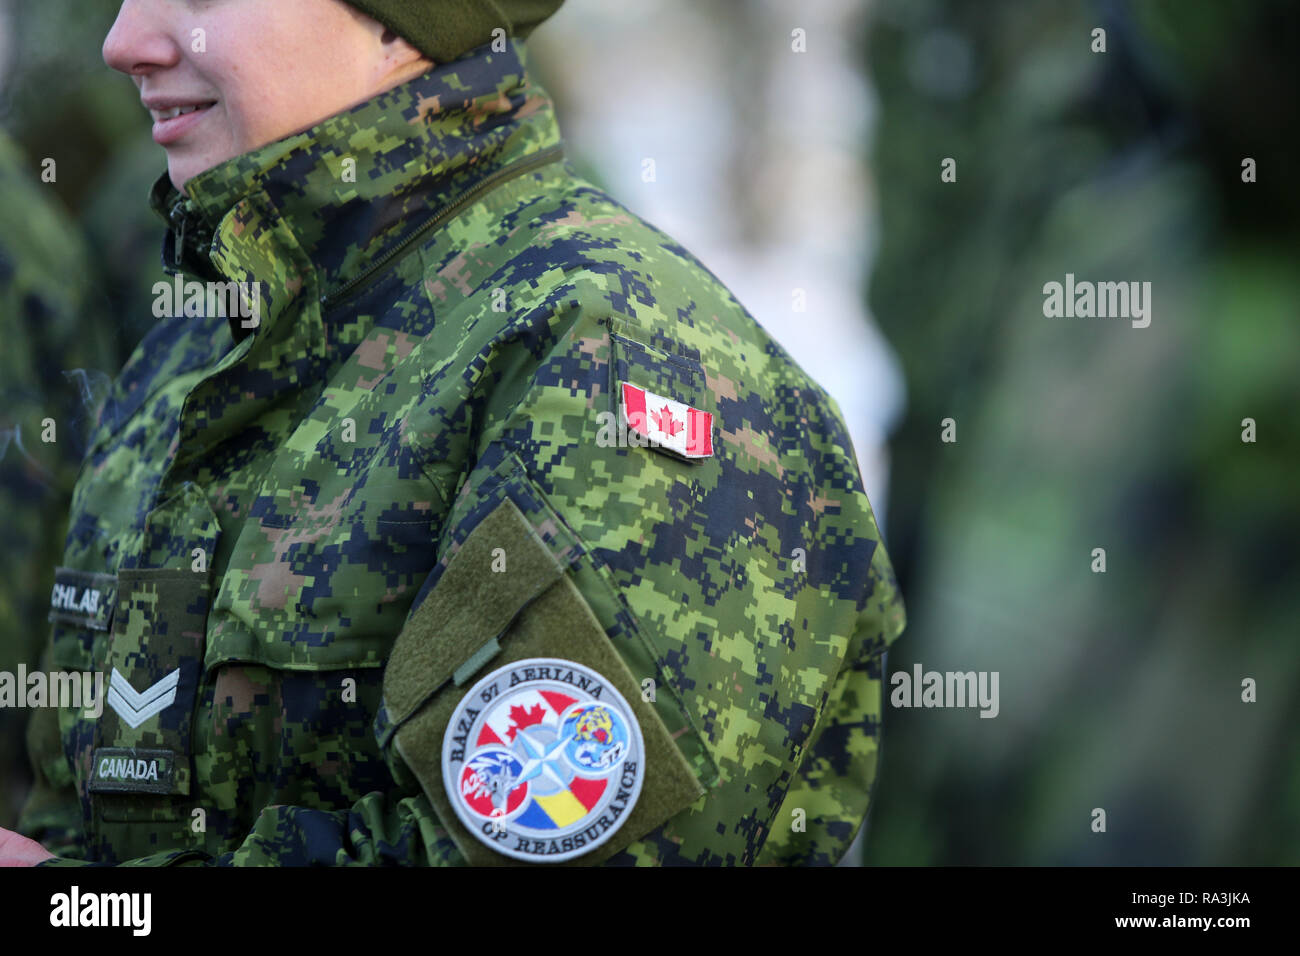 Bucharest, Romania - December 1, 2018: Details with the uniform and flag of Canadian soldiers taking part at the Romanian National Day military parade Stock Photo